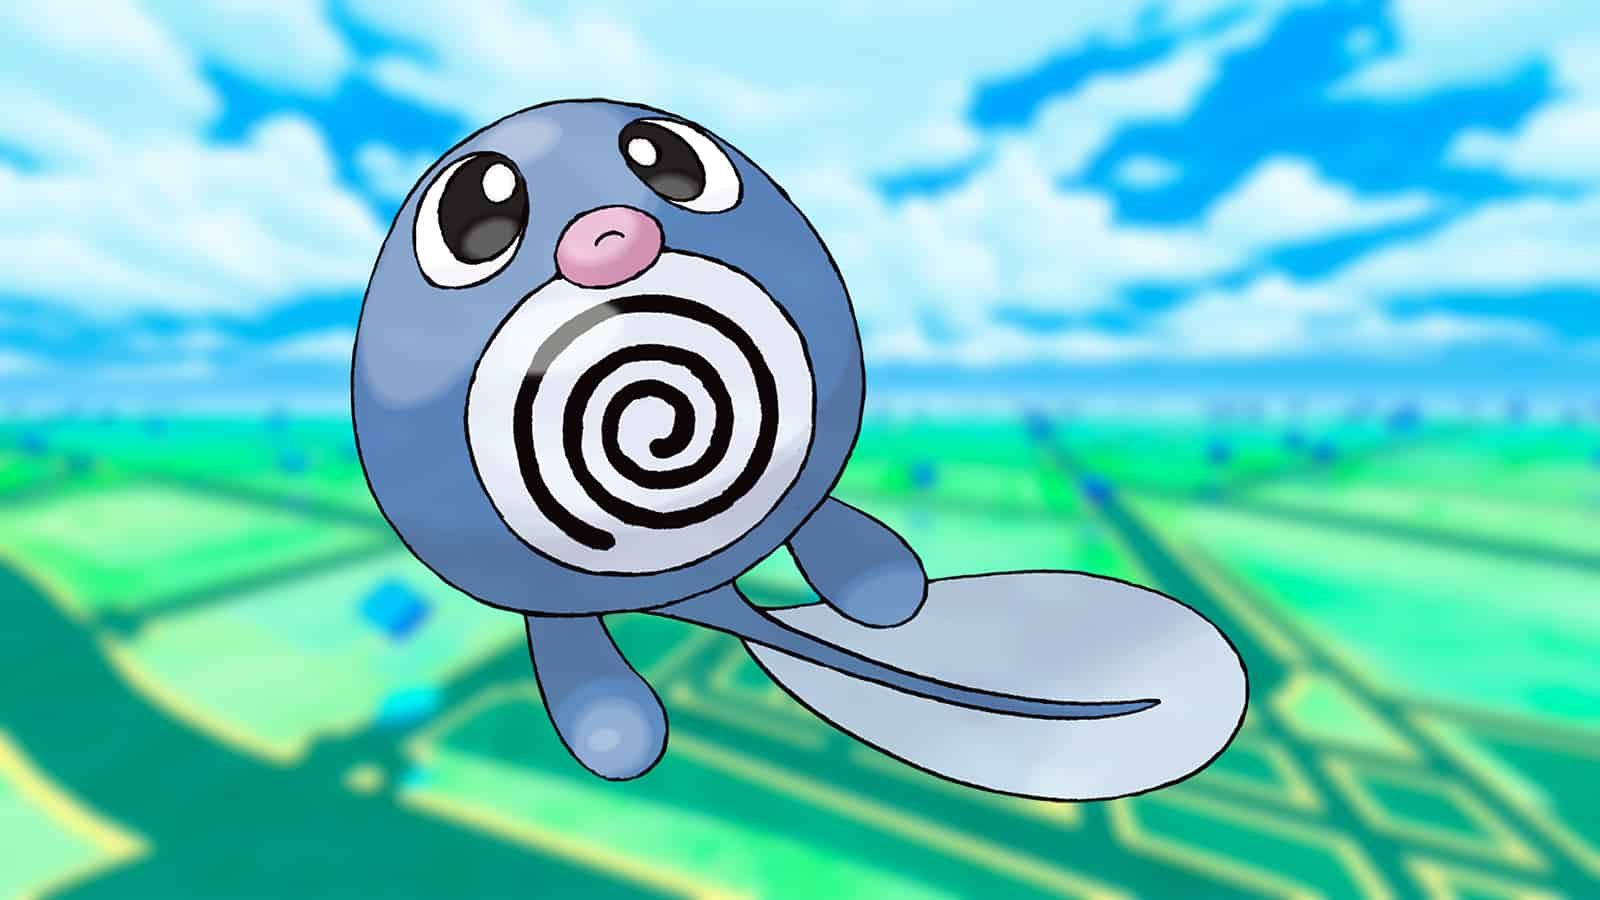 An image of Poliwag on a Pokemon Go background, one of Sierra's Pokemon